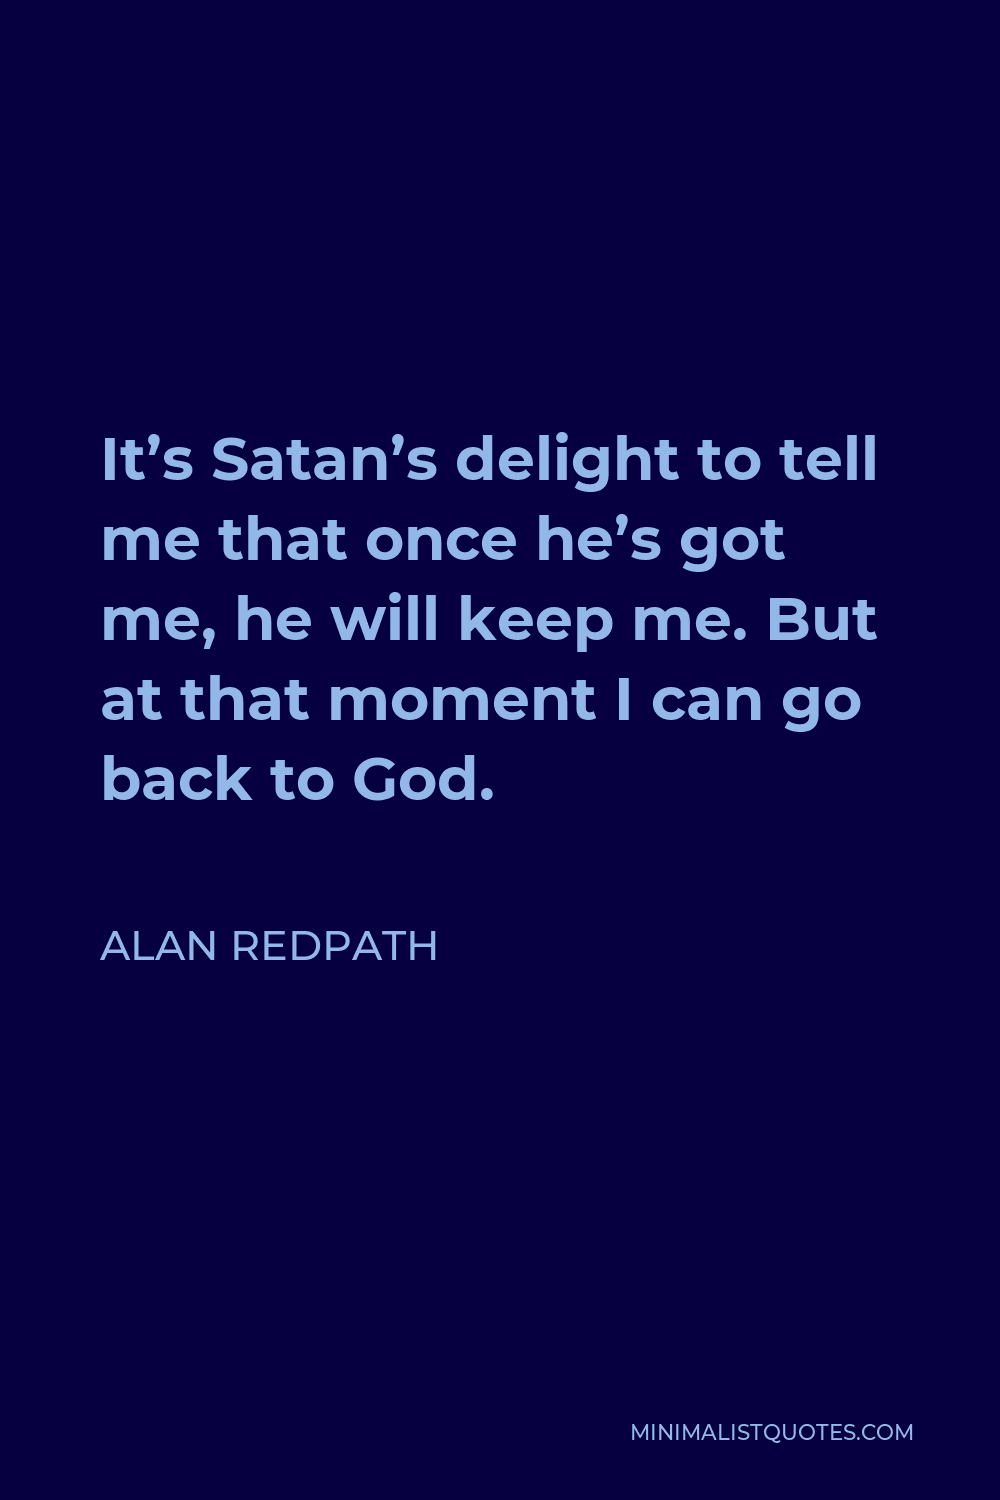 Alan Redpath Quote - It’s Satan’s delight to tell me that once he’s got me, he will keep me. But at that moment I can go back to God.